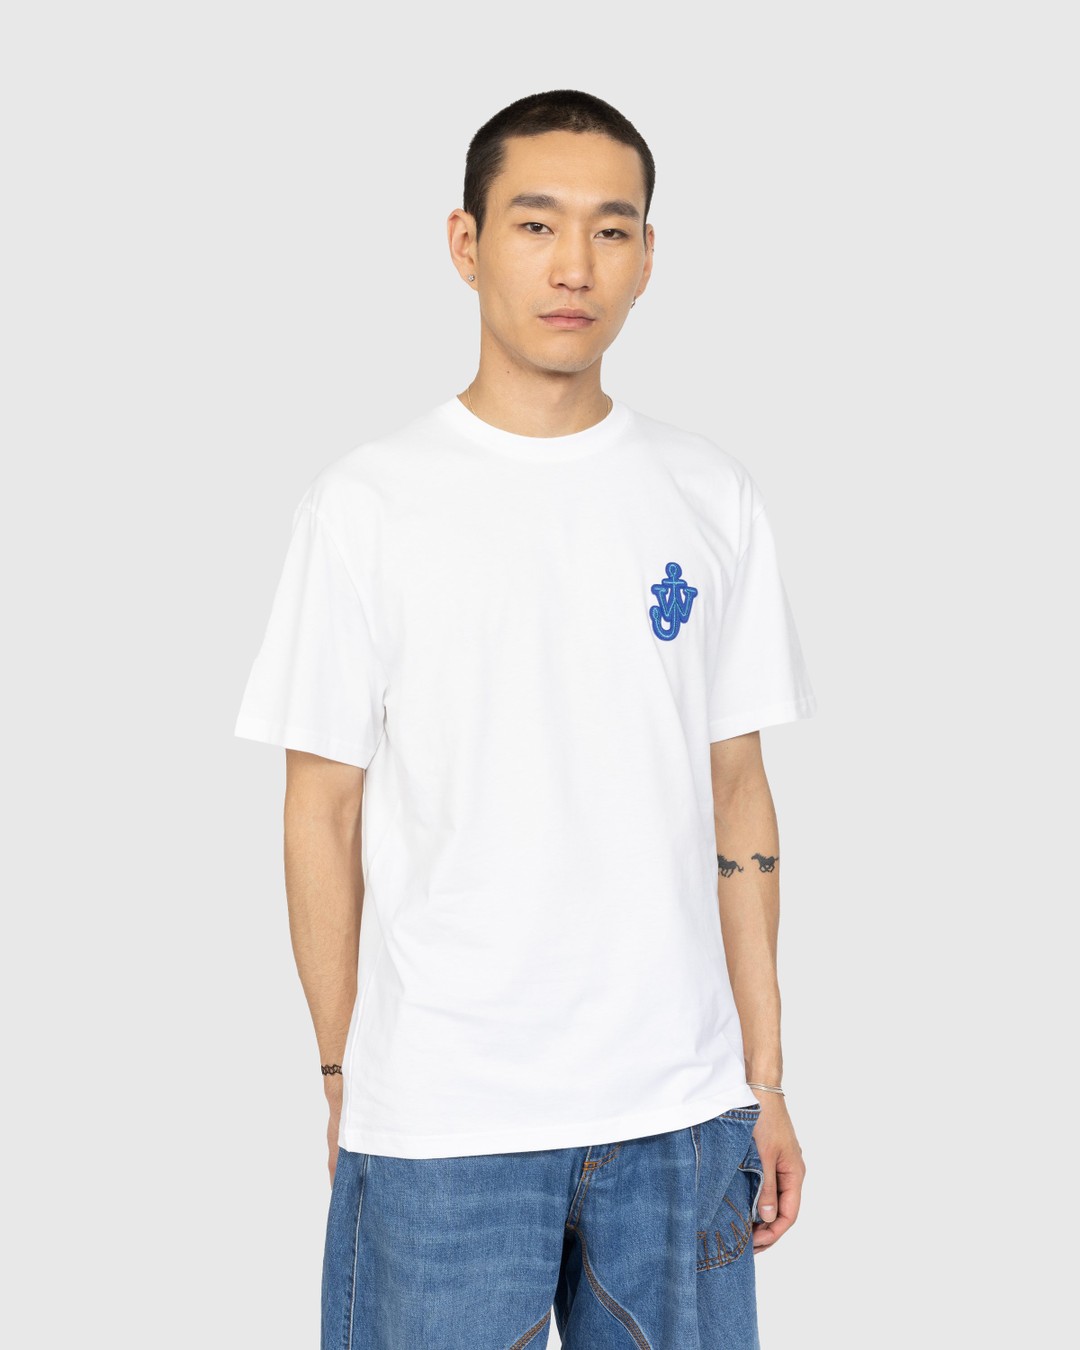 J.W. Anderson – Anchor Patch T-Shirt White - T-shirts - White - Image 2